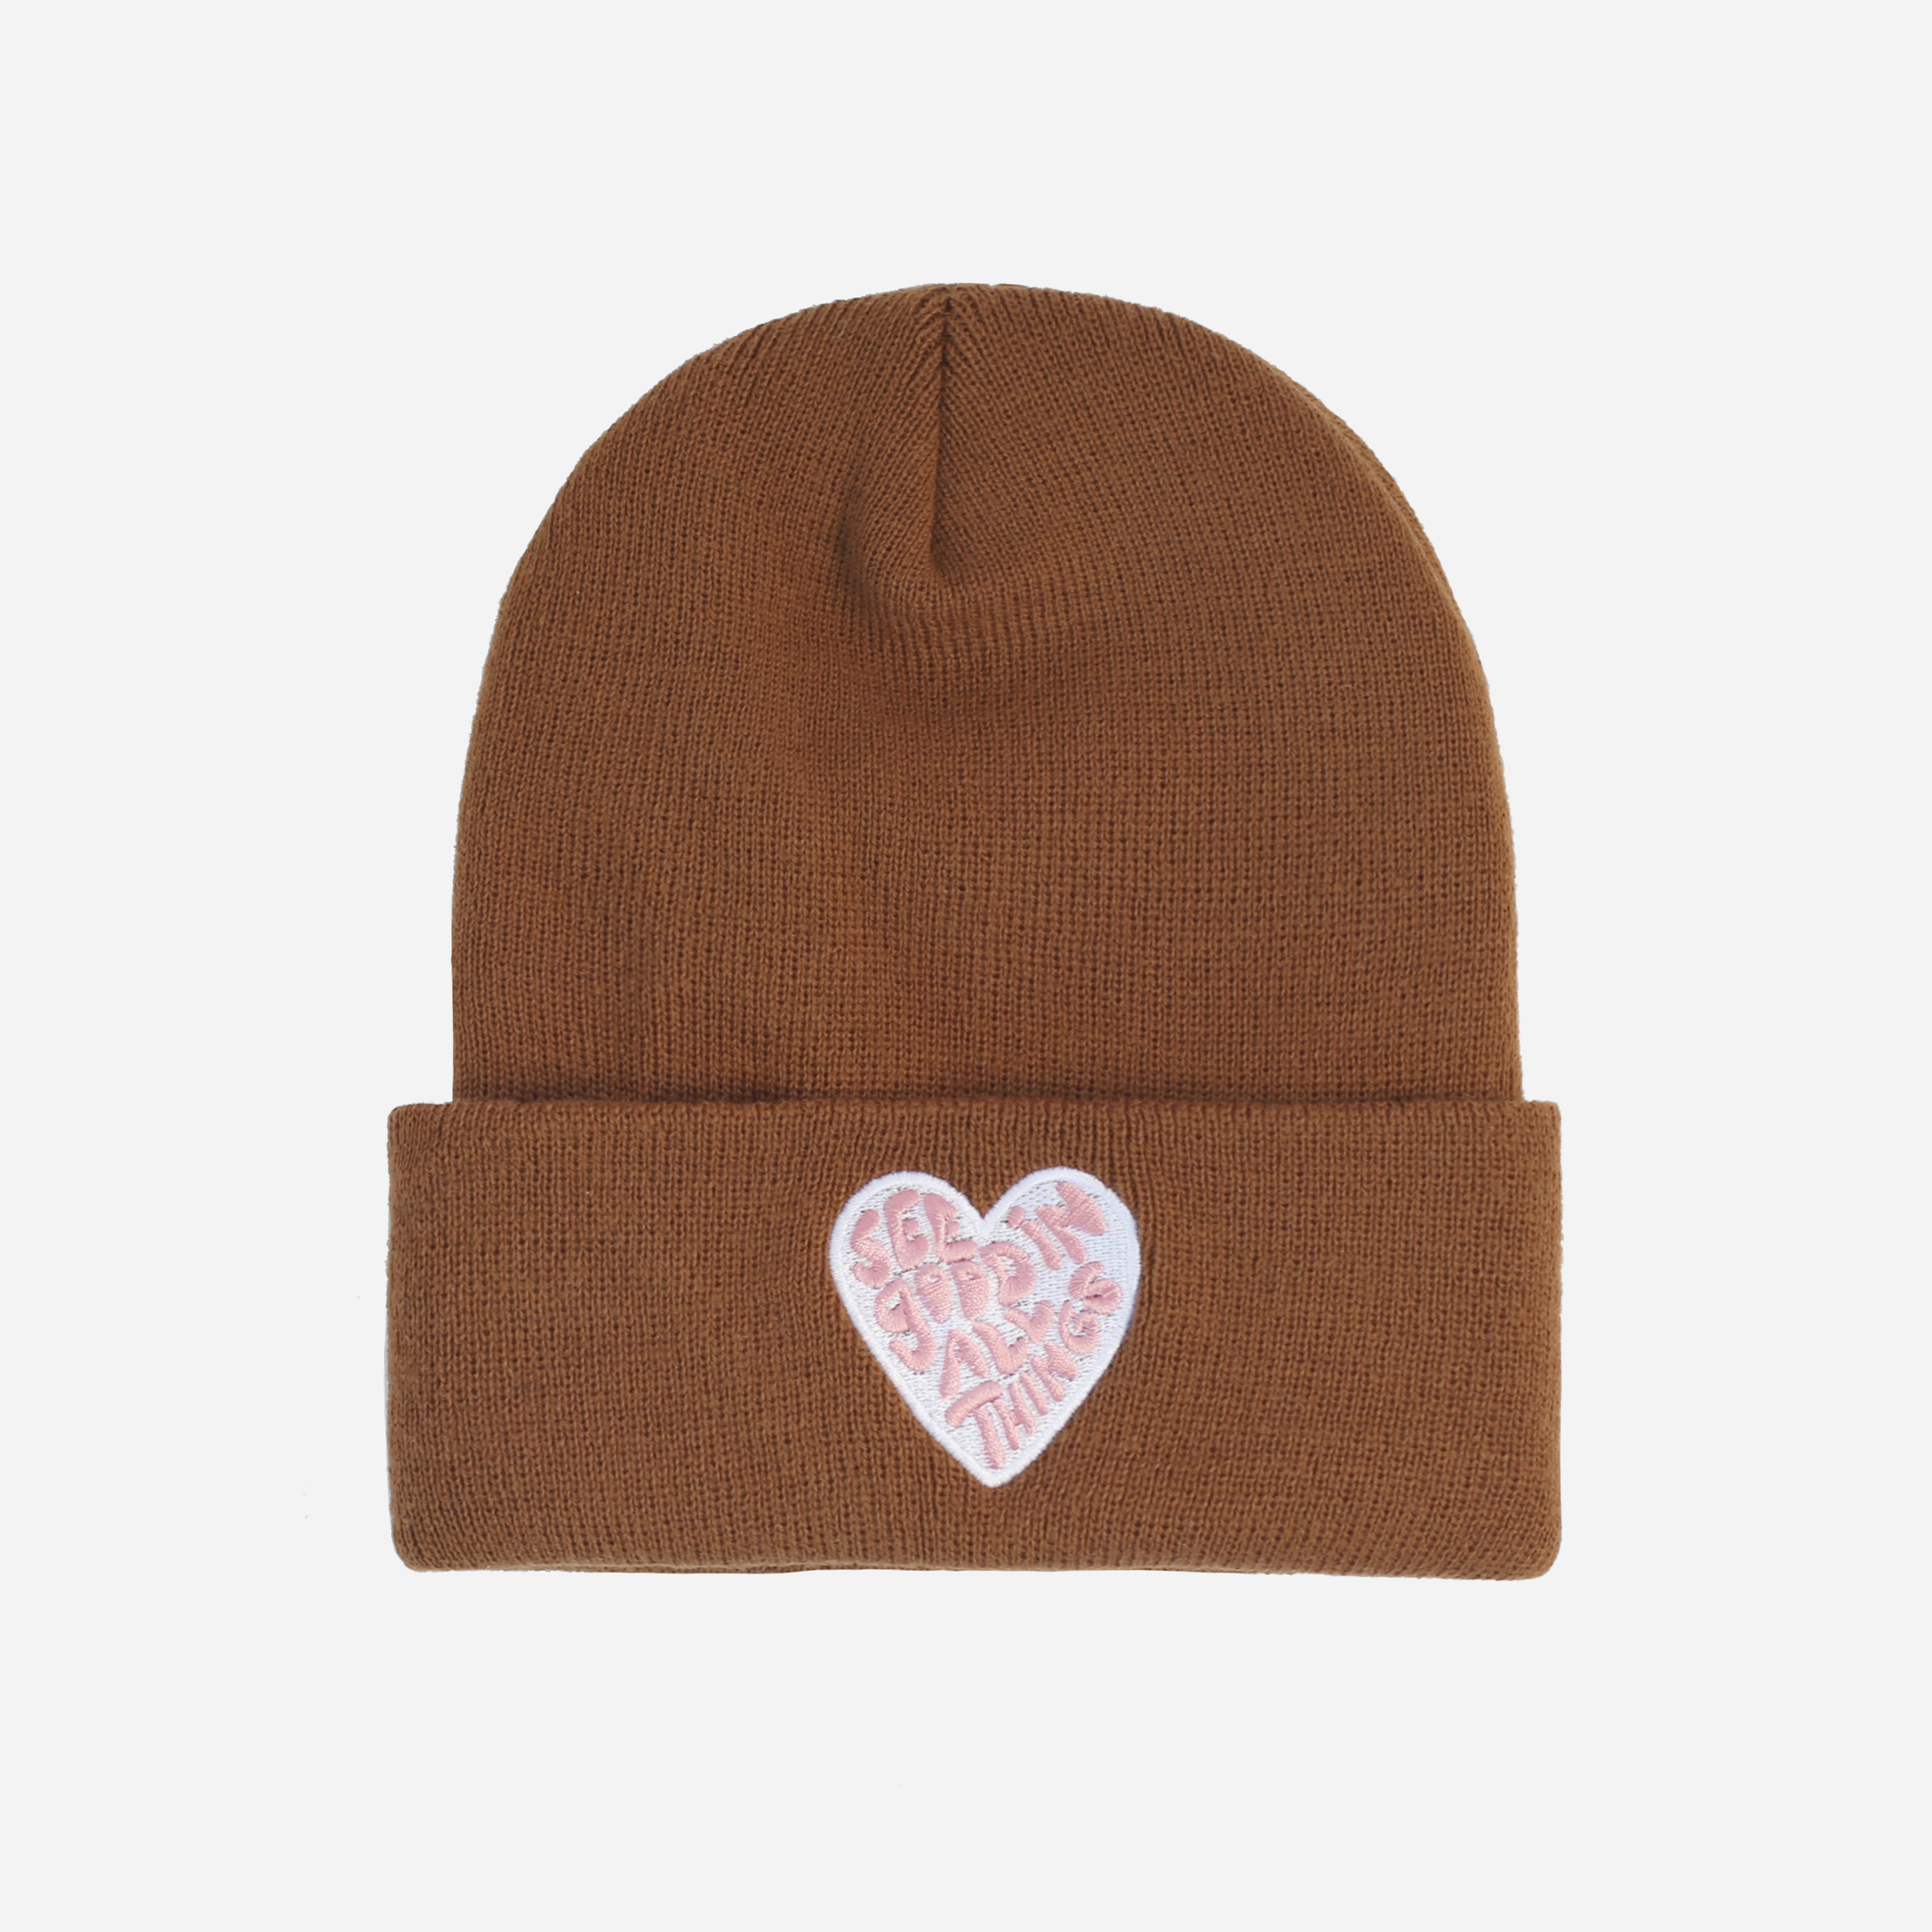 See Good In All Things Beanie (Brown)